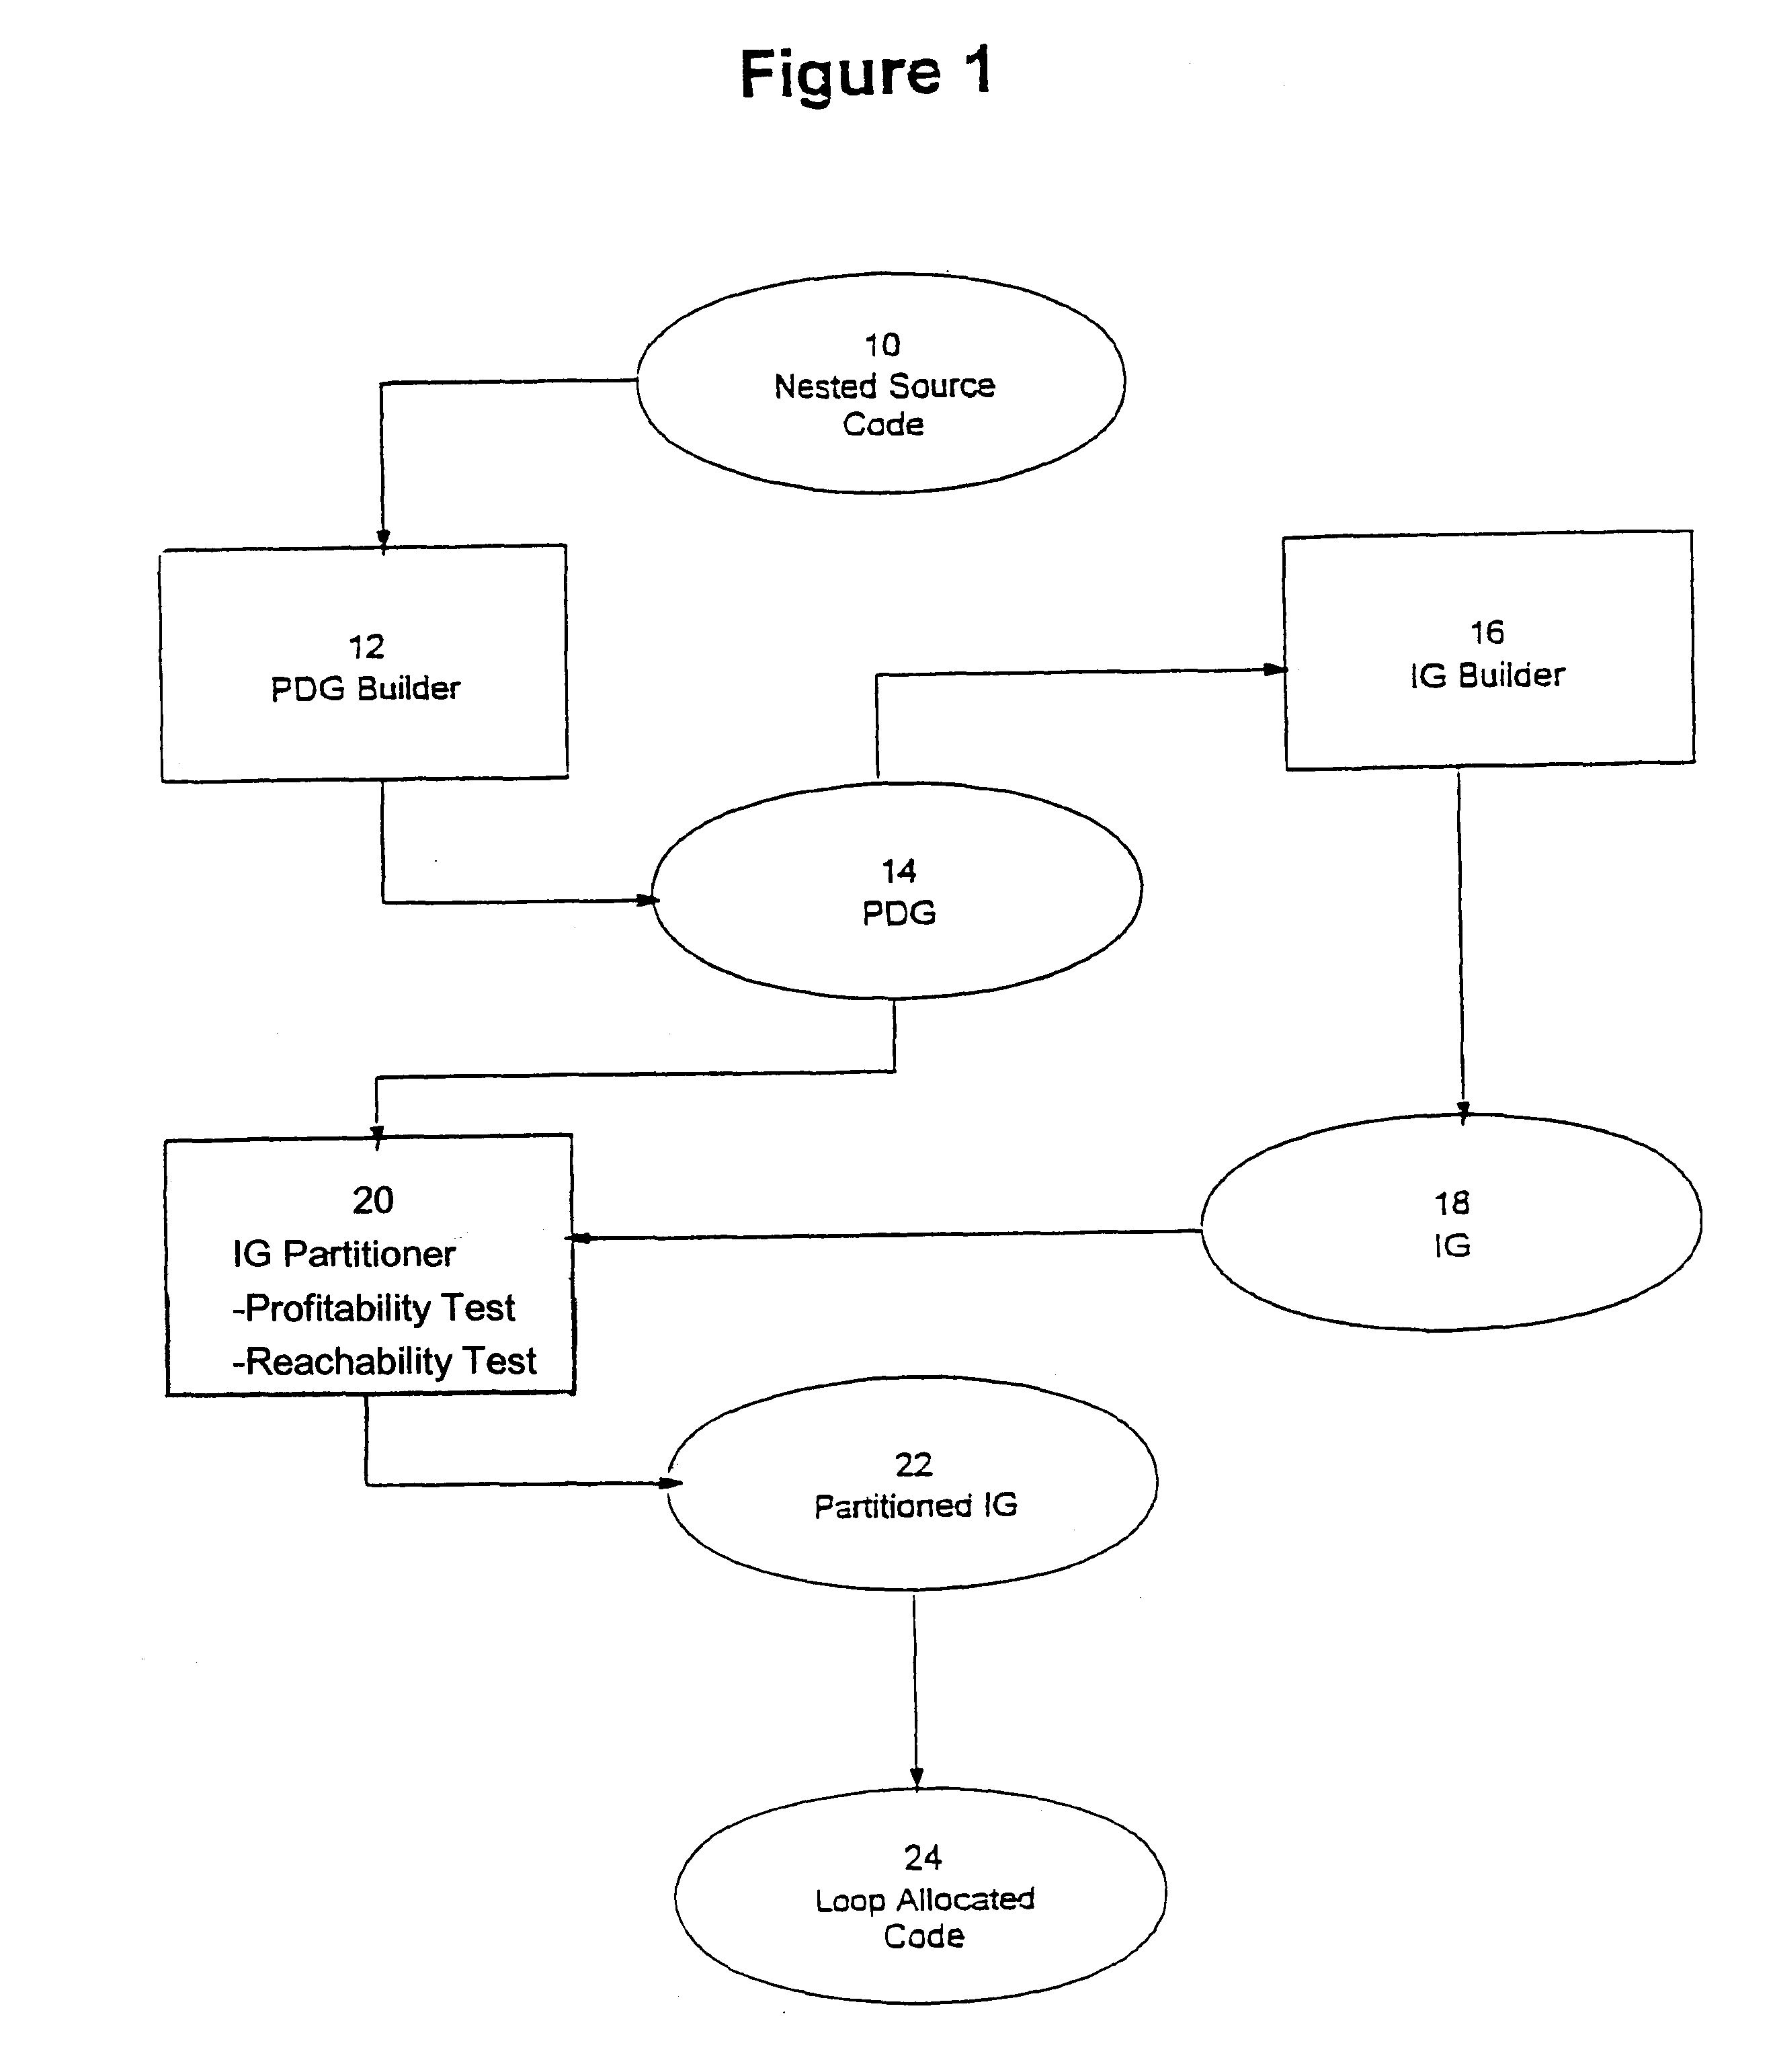 Loop allocation for optimizing compilers